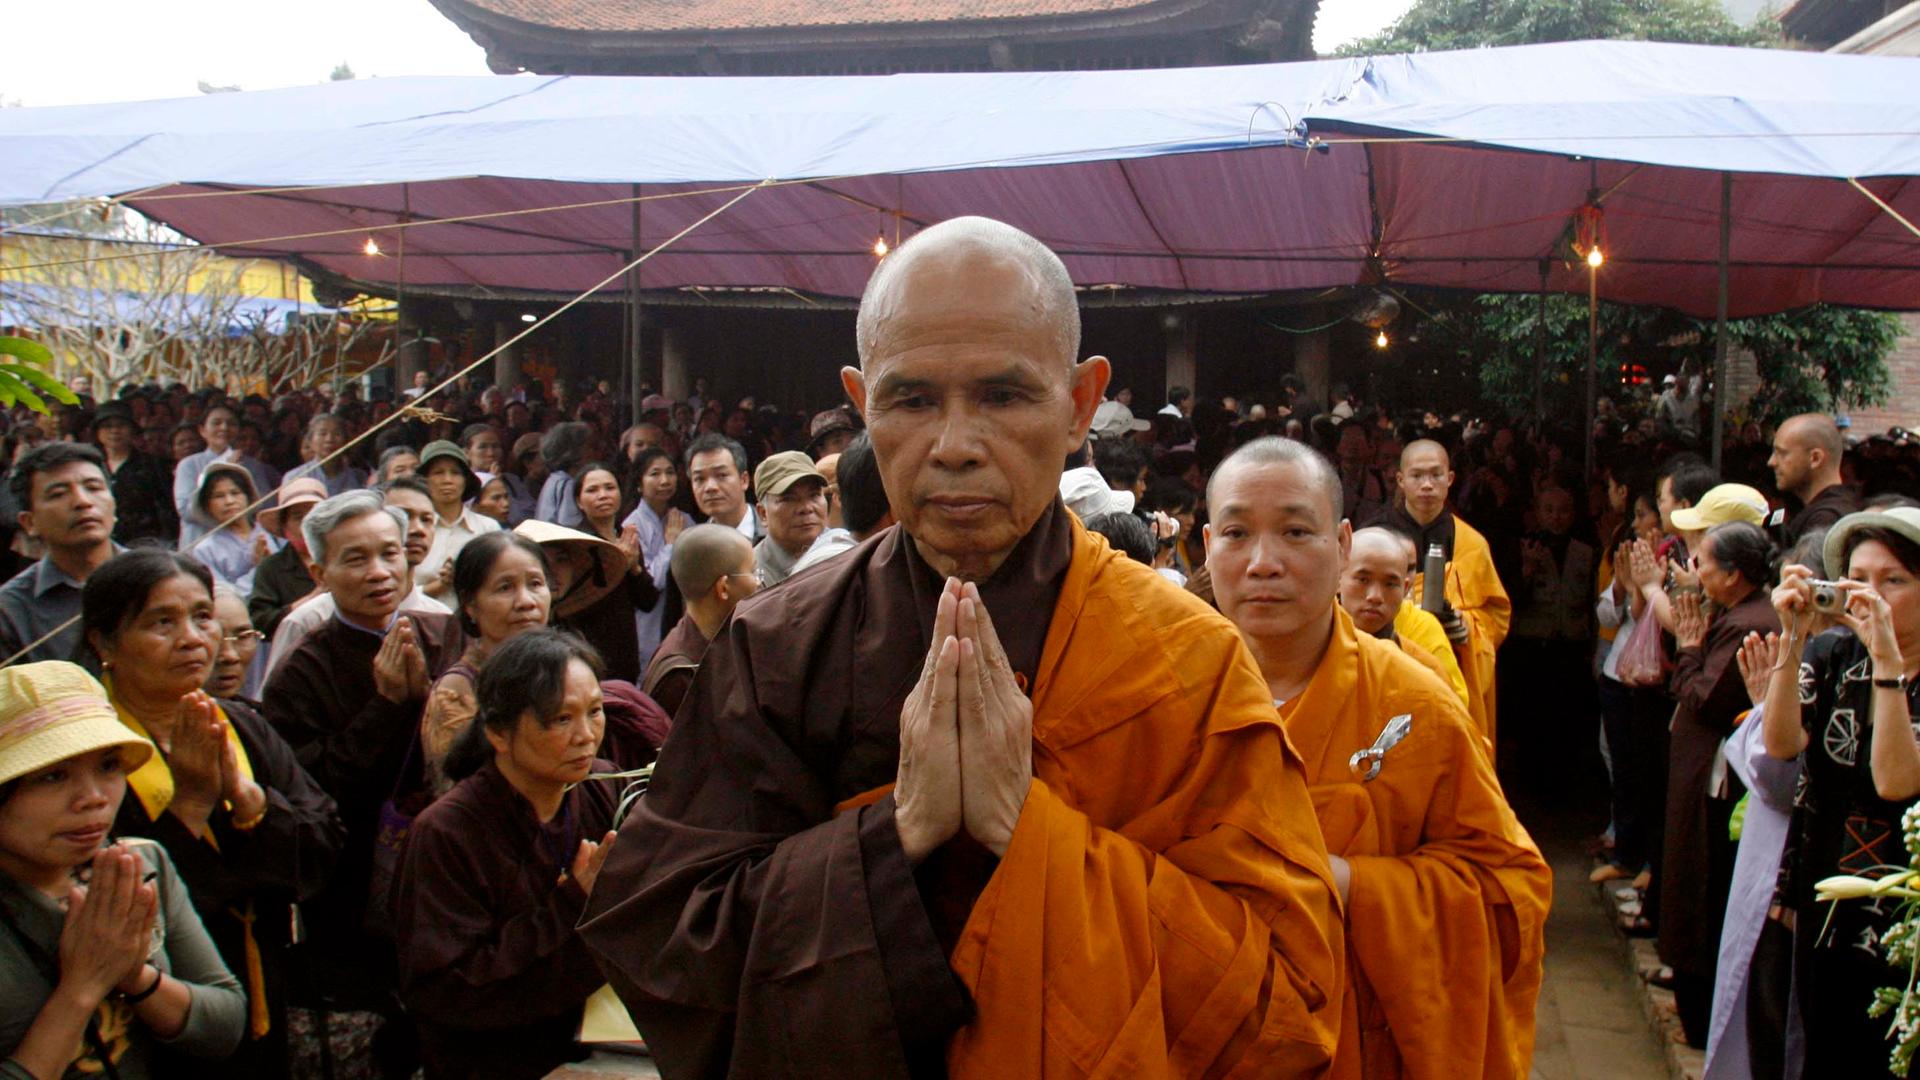 A Buddhist monk walks through a crowd with his hands in a prayer position